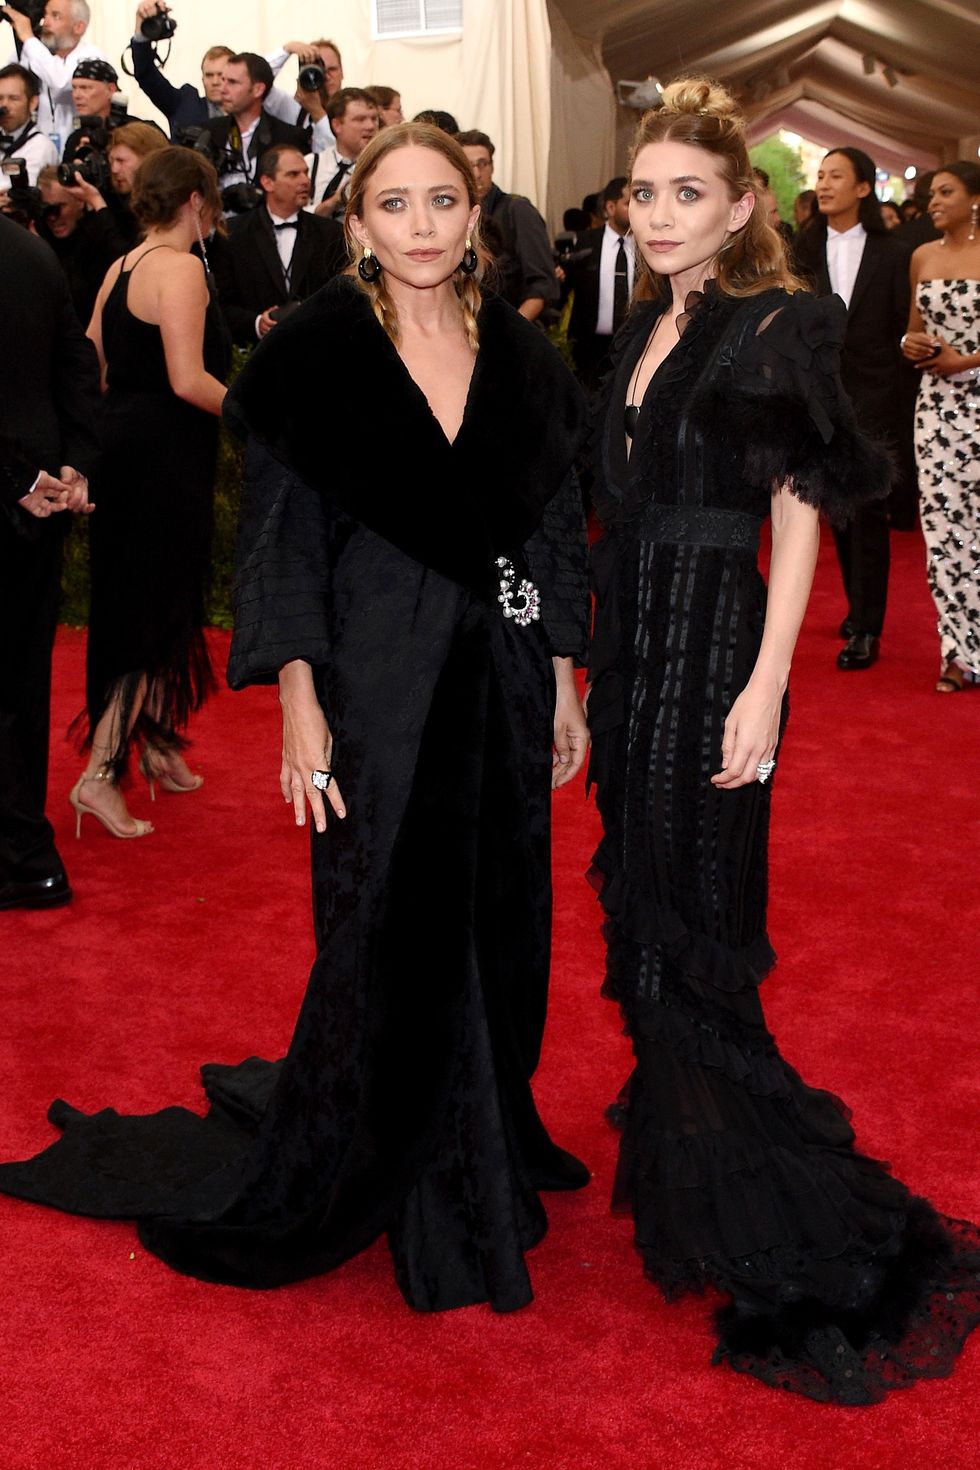 NEW YORK, NY - MAY 04:  Mary Kate and Ashley Olsen attend the "China: Through The Looking Glass" Costume Institute Benefit Gala at the Metropolitan Museum of Art on May 4, 2015 in New York City.  (Photo by Larry Busacca/Getty Images)